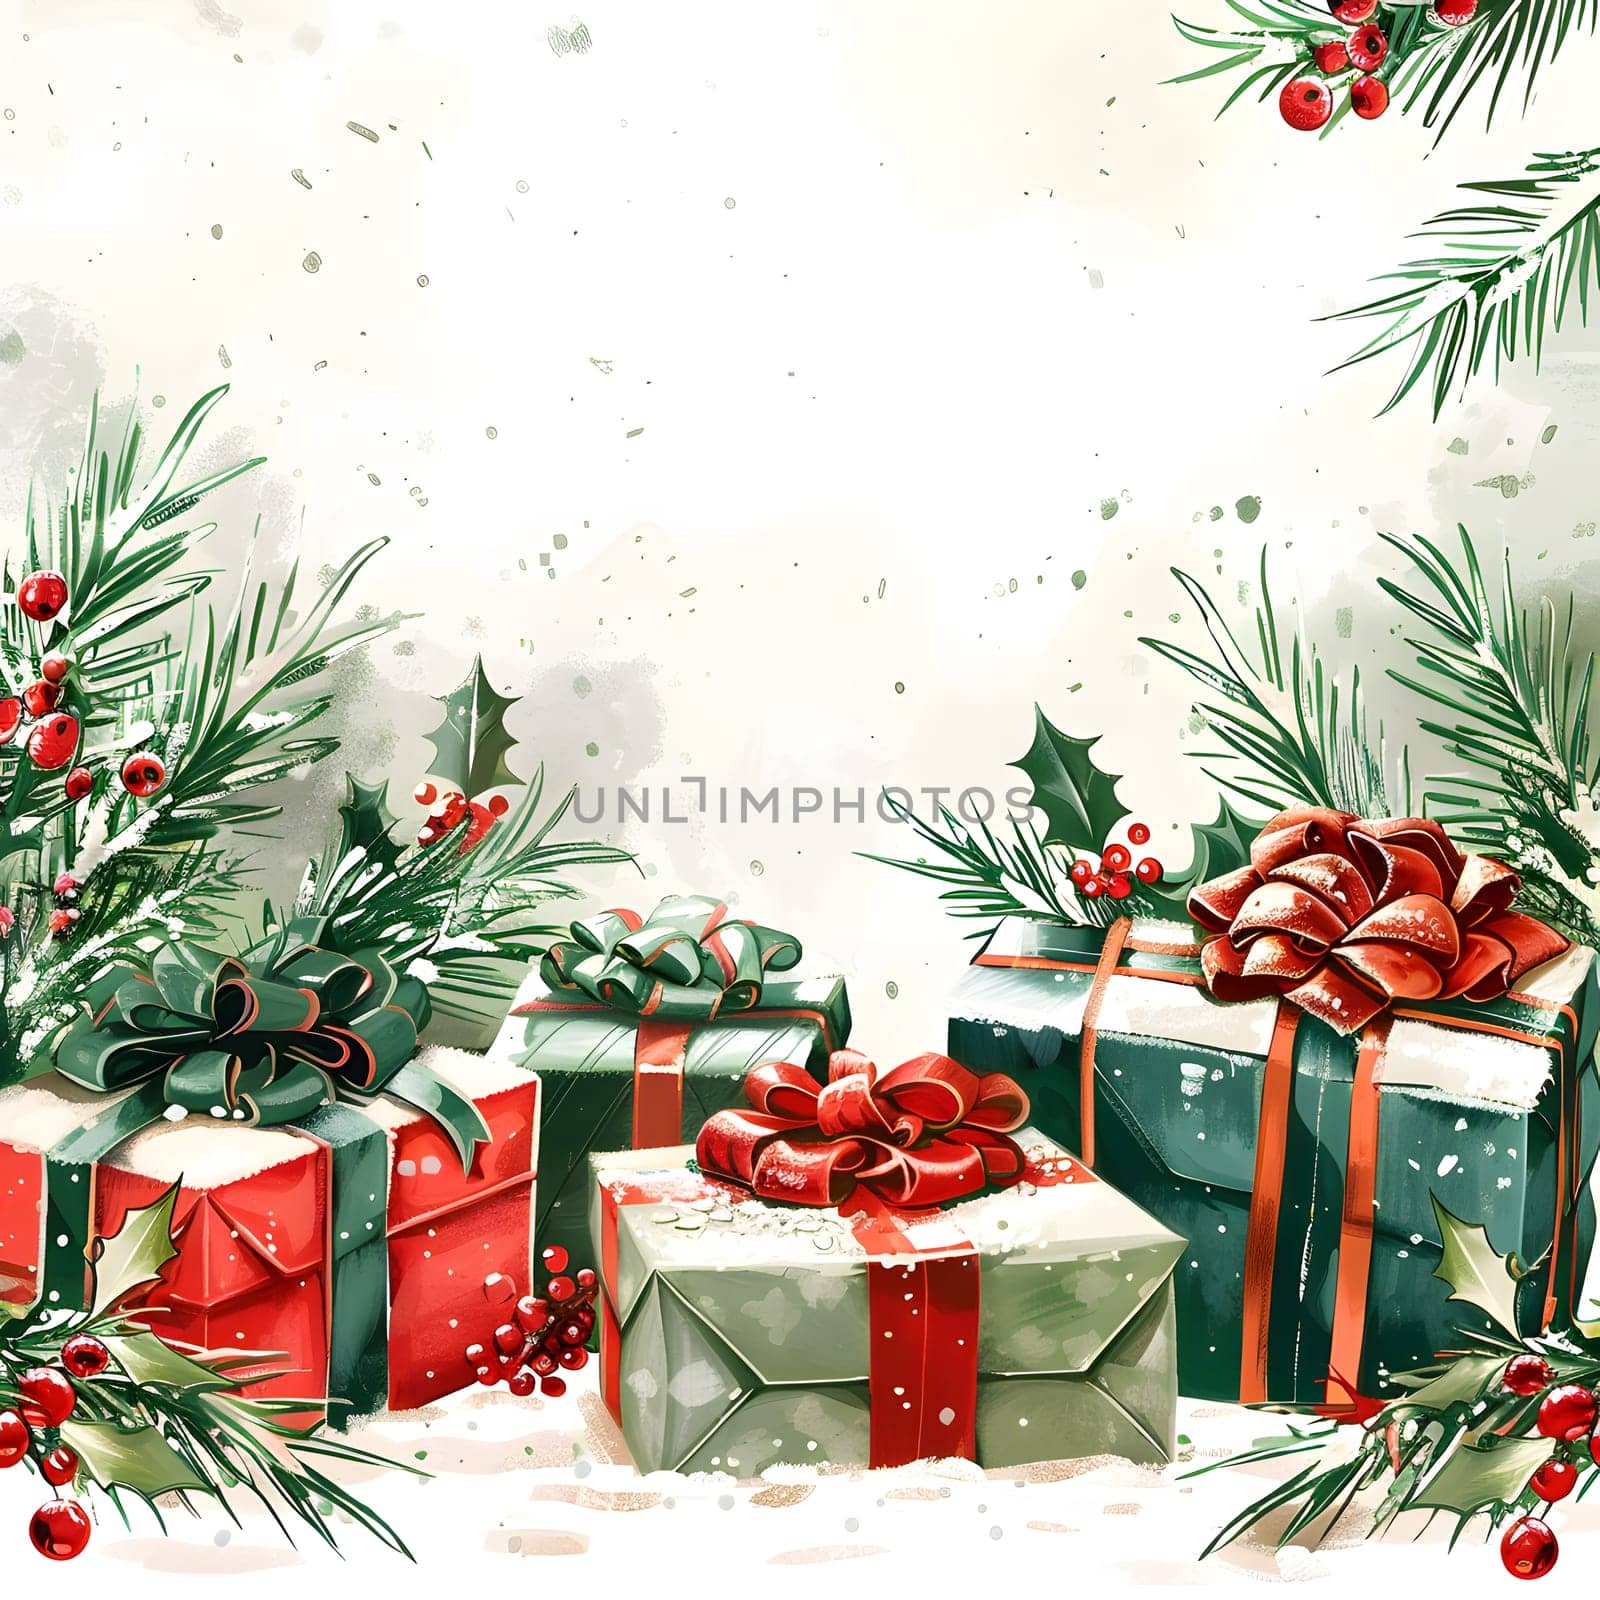 A watercolor painting of Christmas presents in the snow featuring holiday ornaments, evergreen branches, and twinkling Christmas decorations